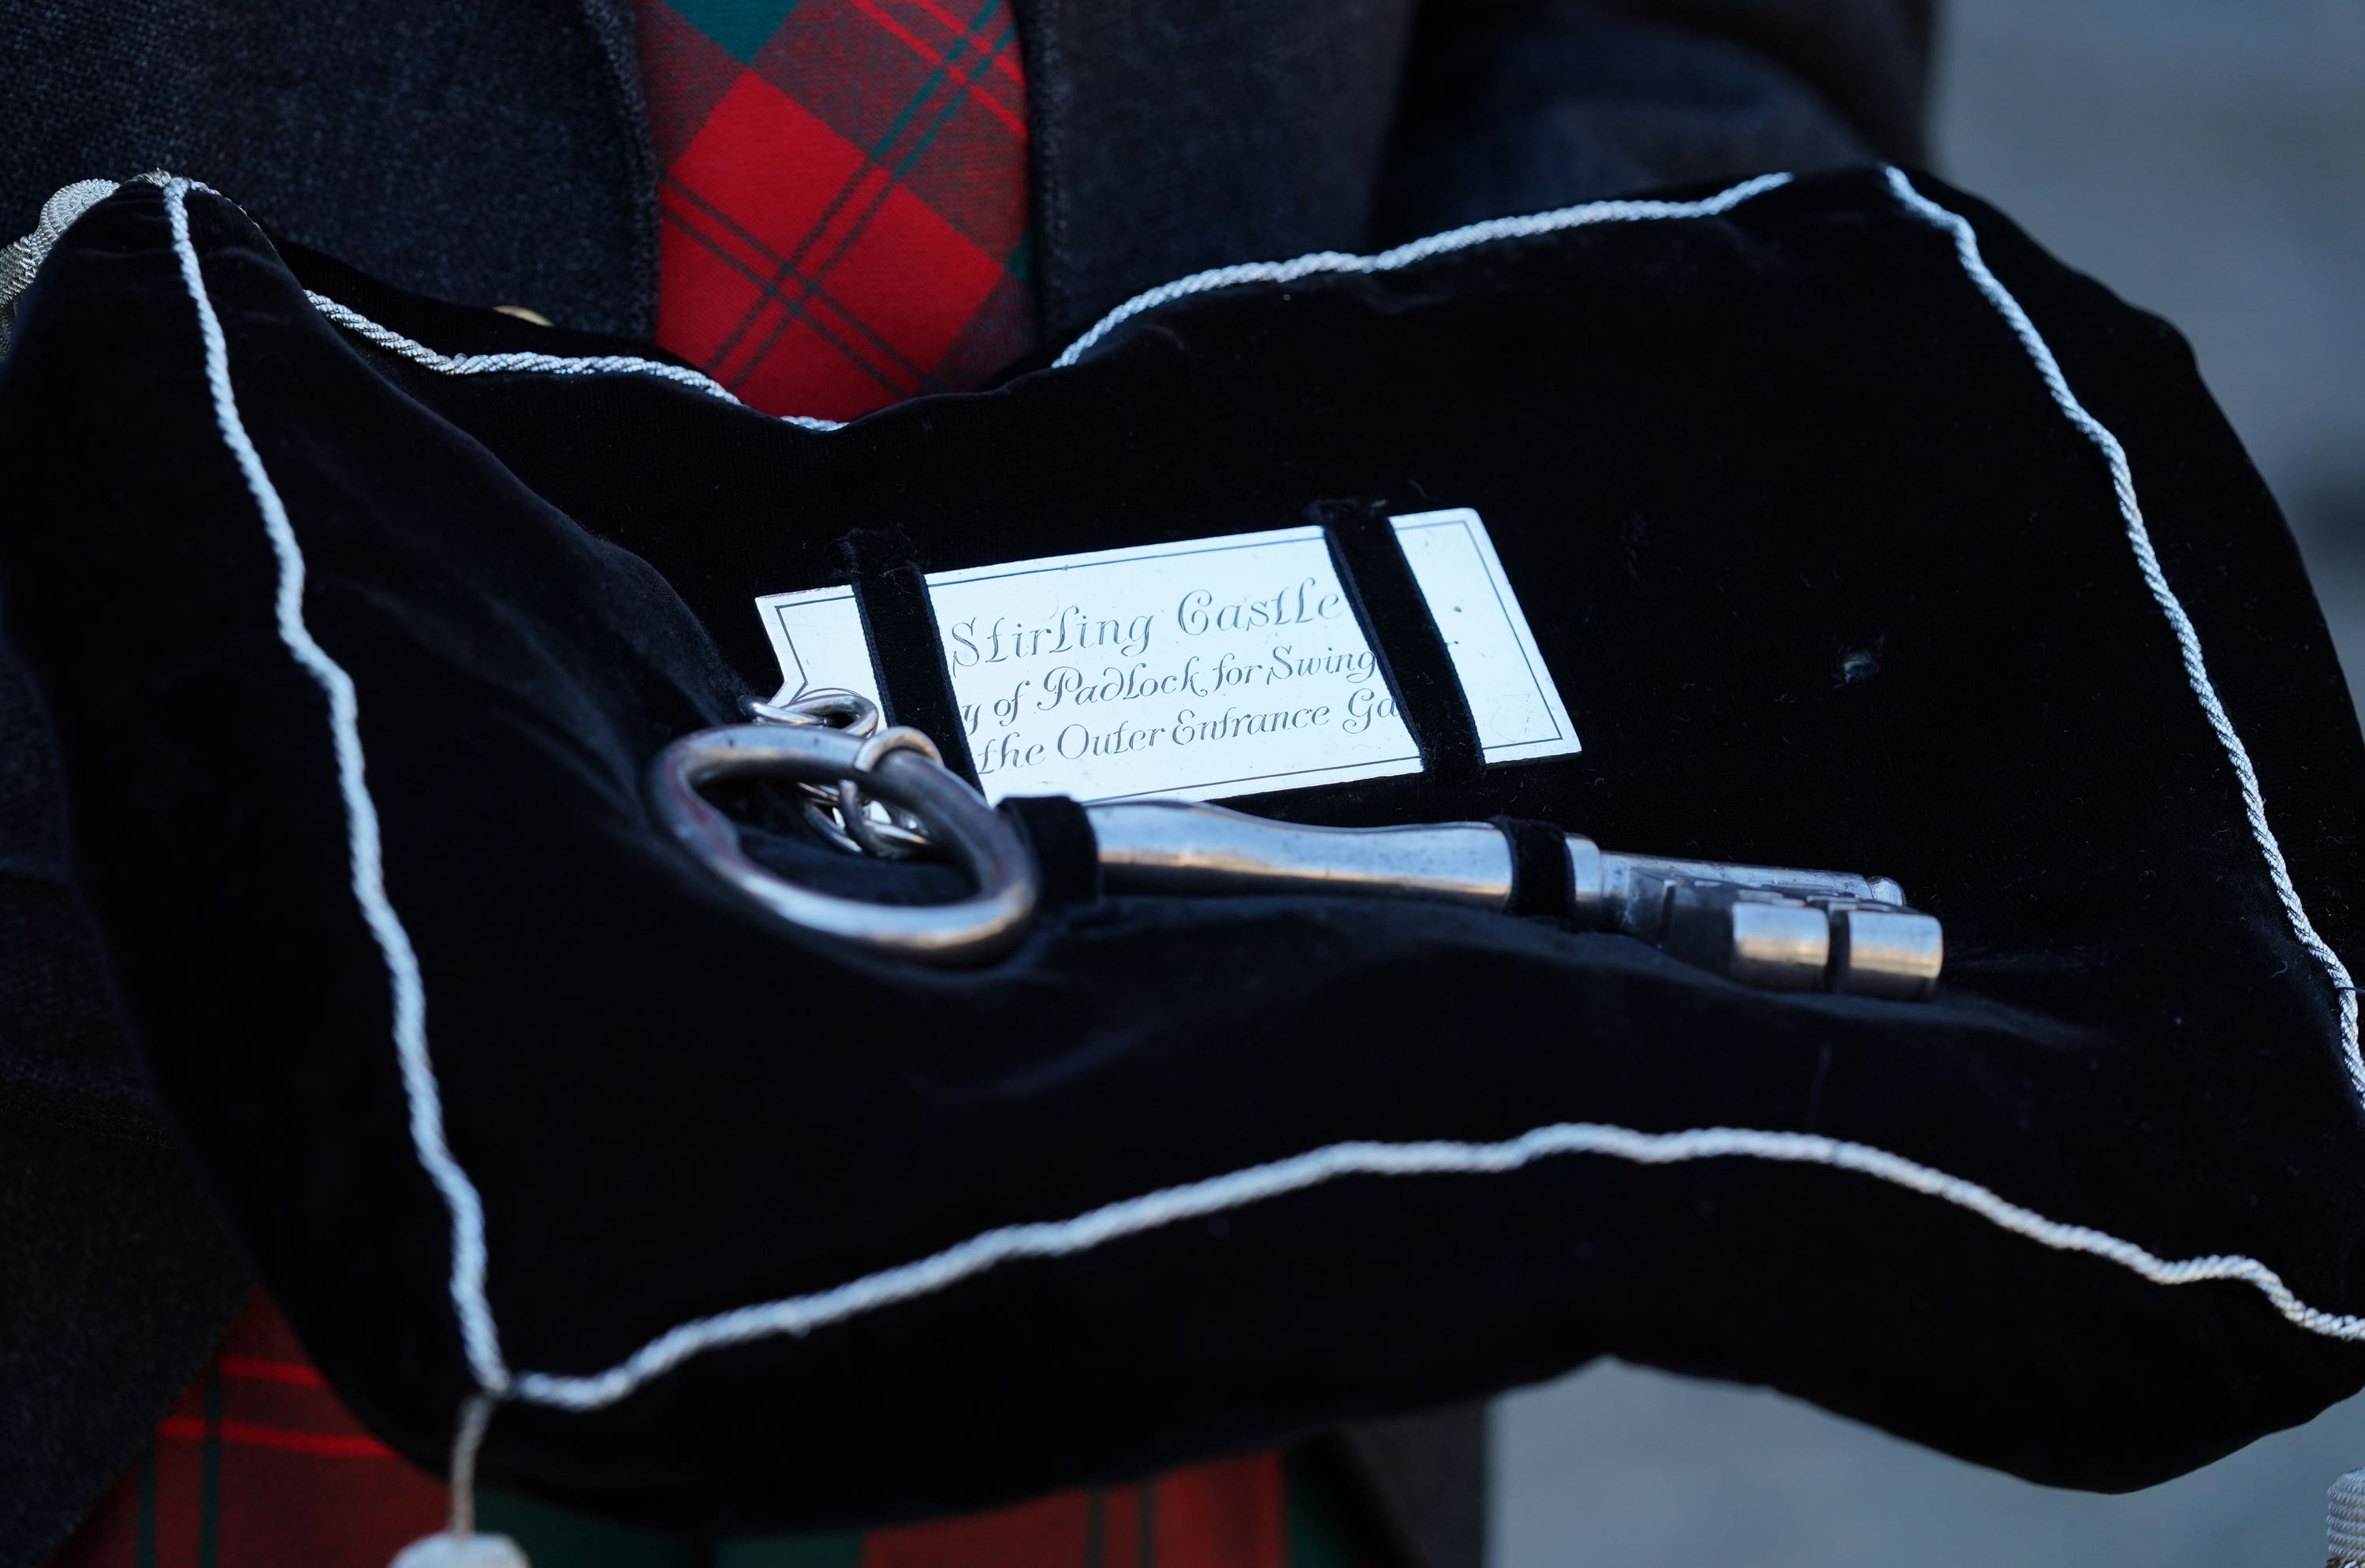 The key to Stirling Castle is held ahead of the Queen’s arrival (Andrew Milligan/PA)